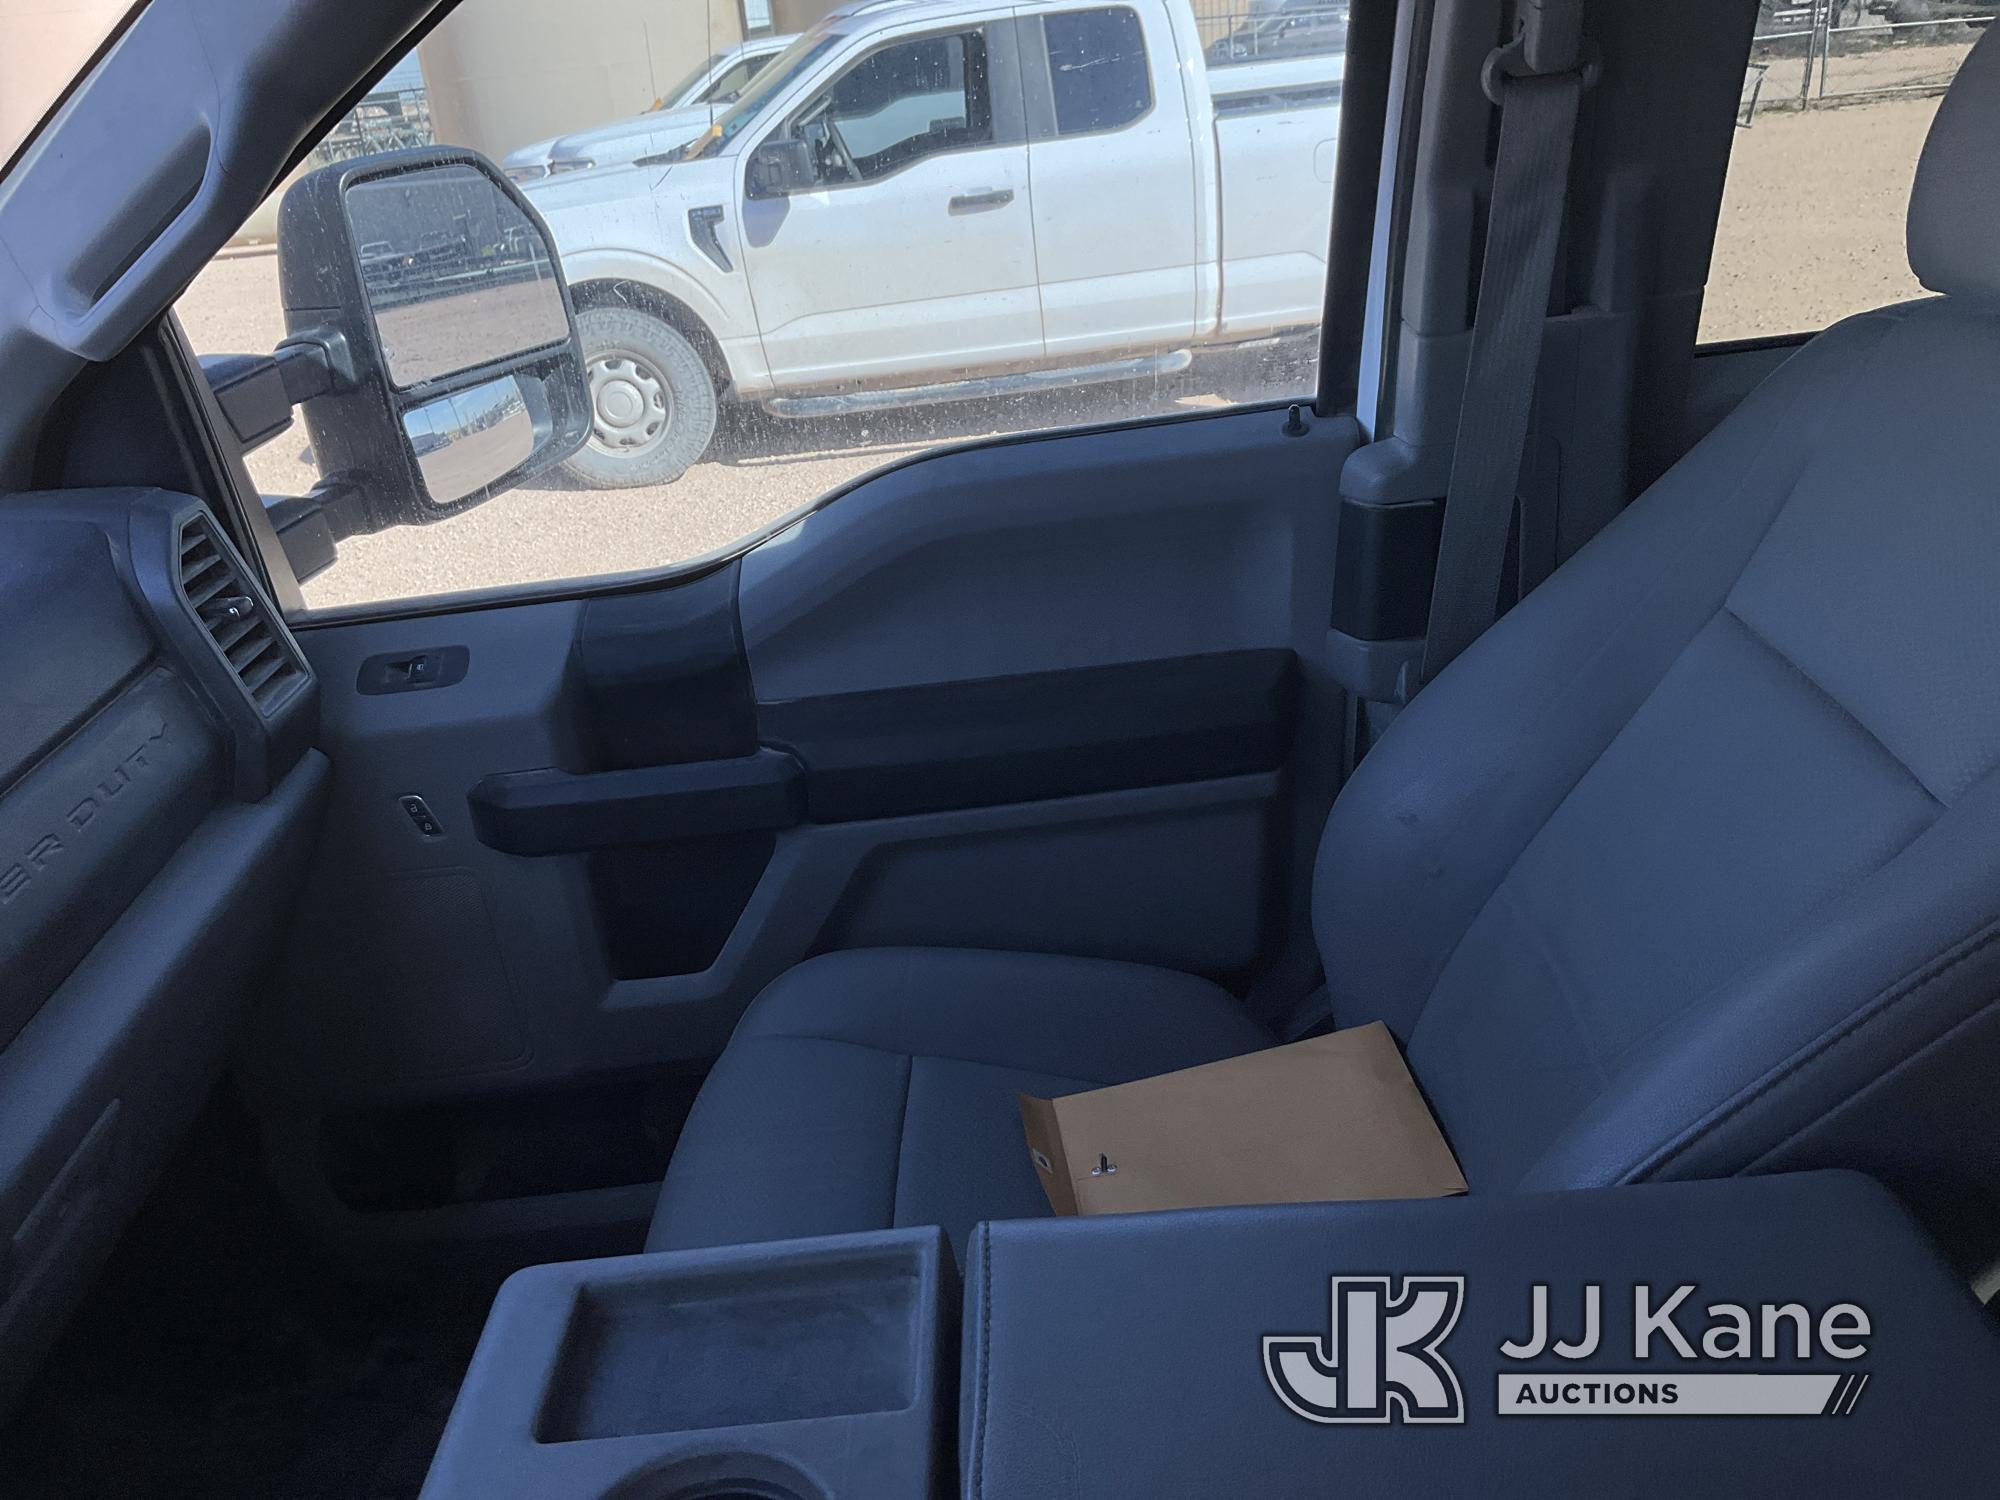 (Midland, TX) 2019 Ford F250 4x4 Extended-Cab Pickup Truck Runs & Drives) (Jump To Start, Tailgate D